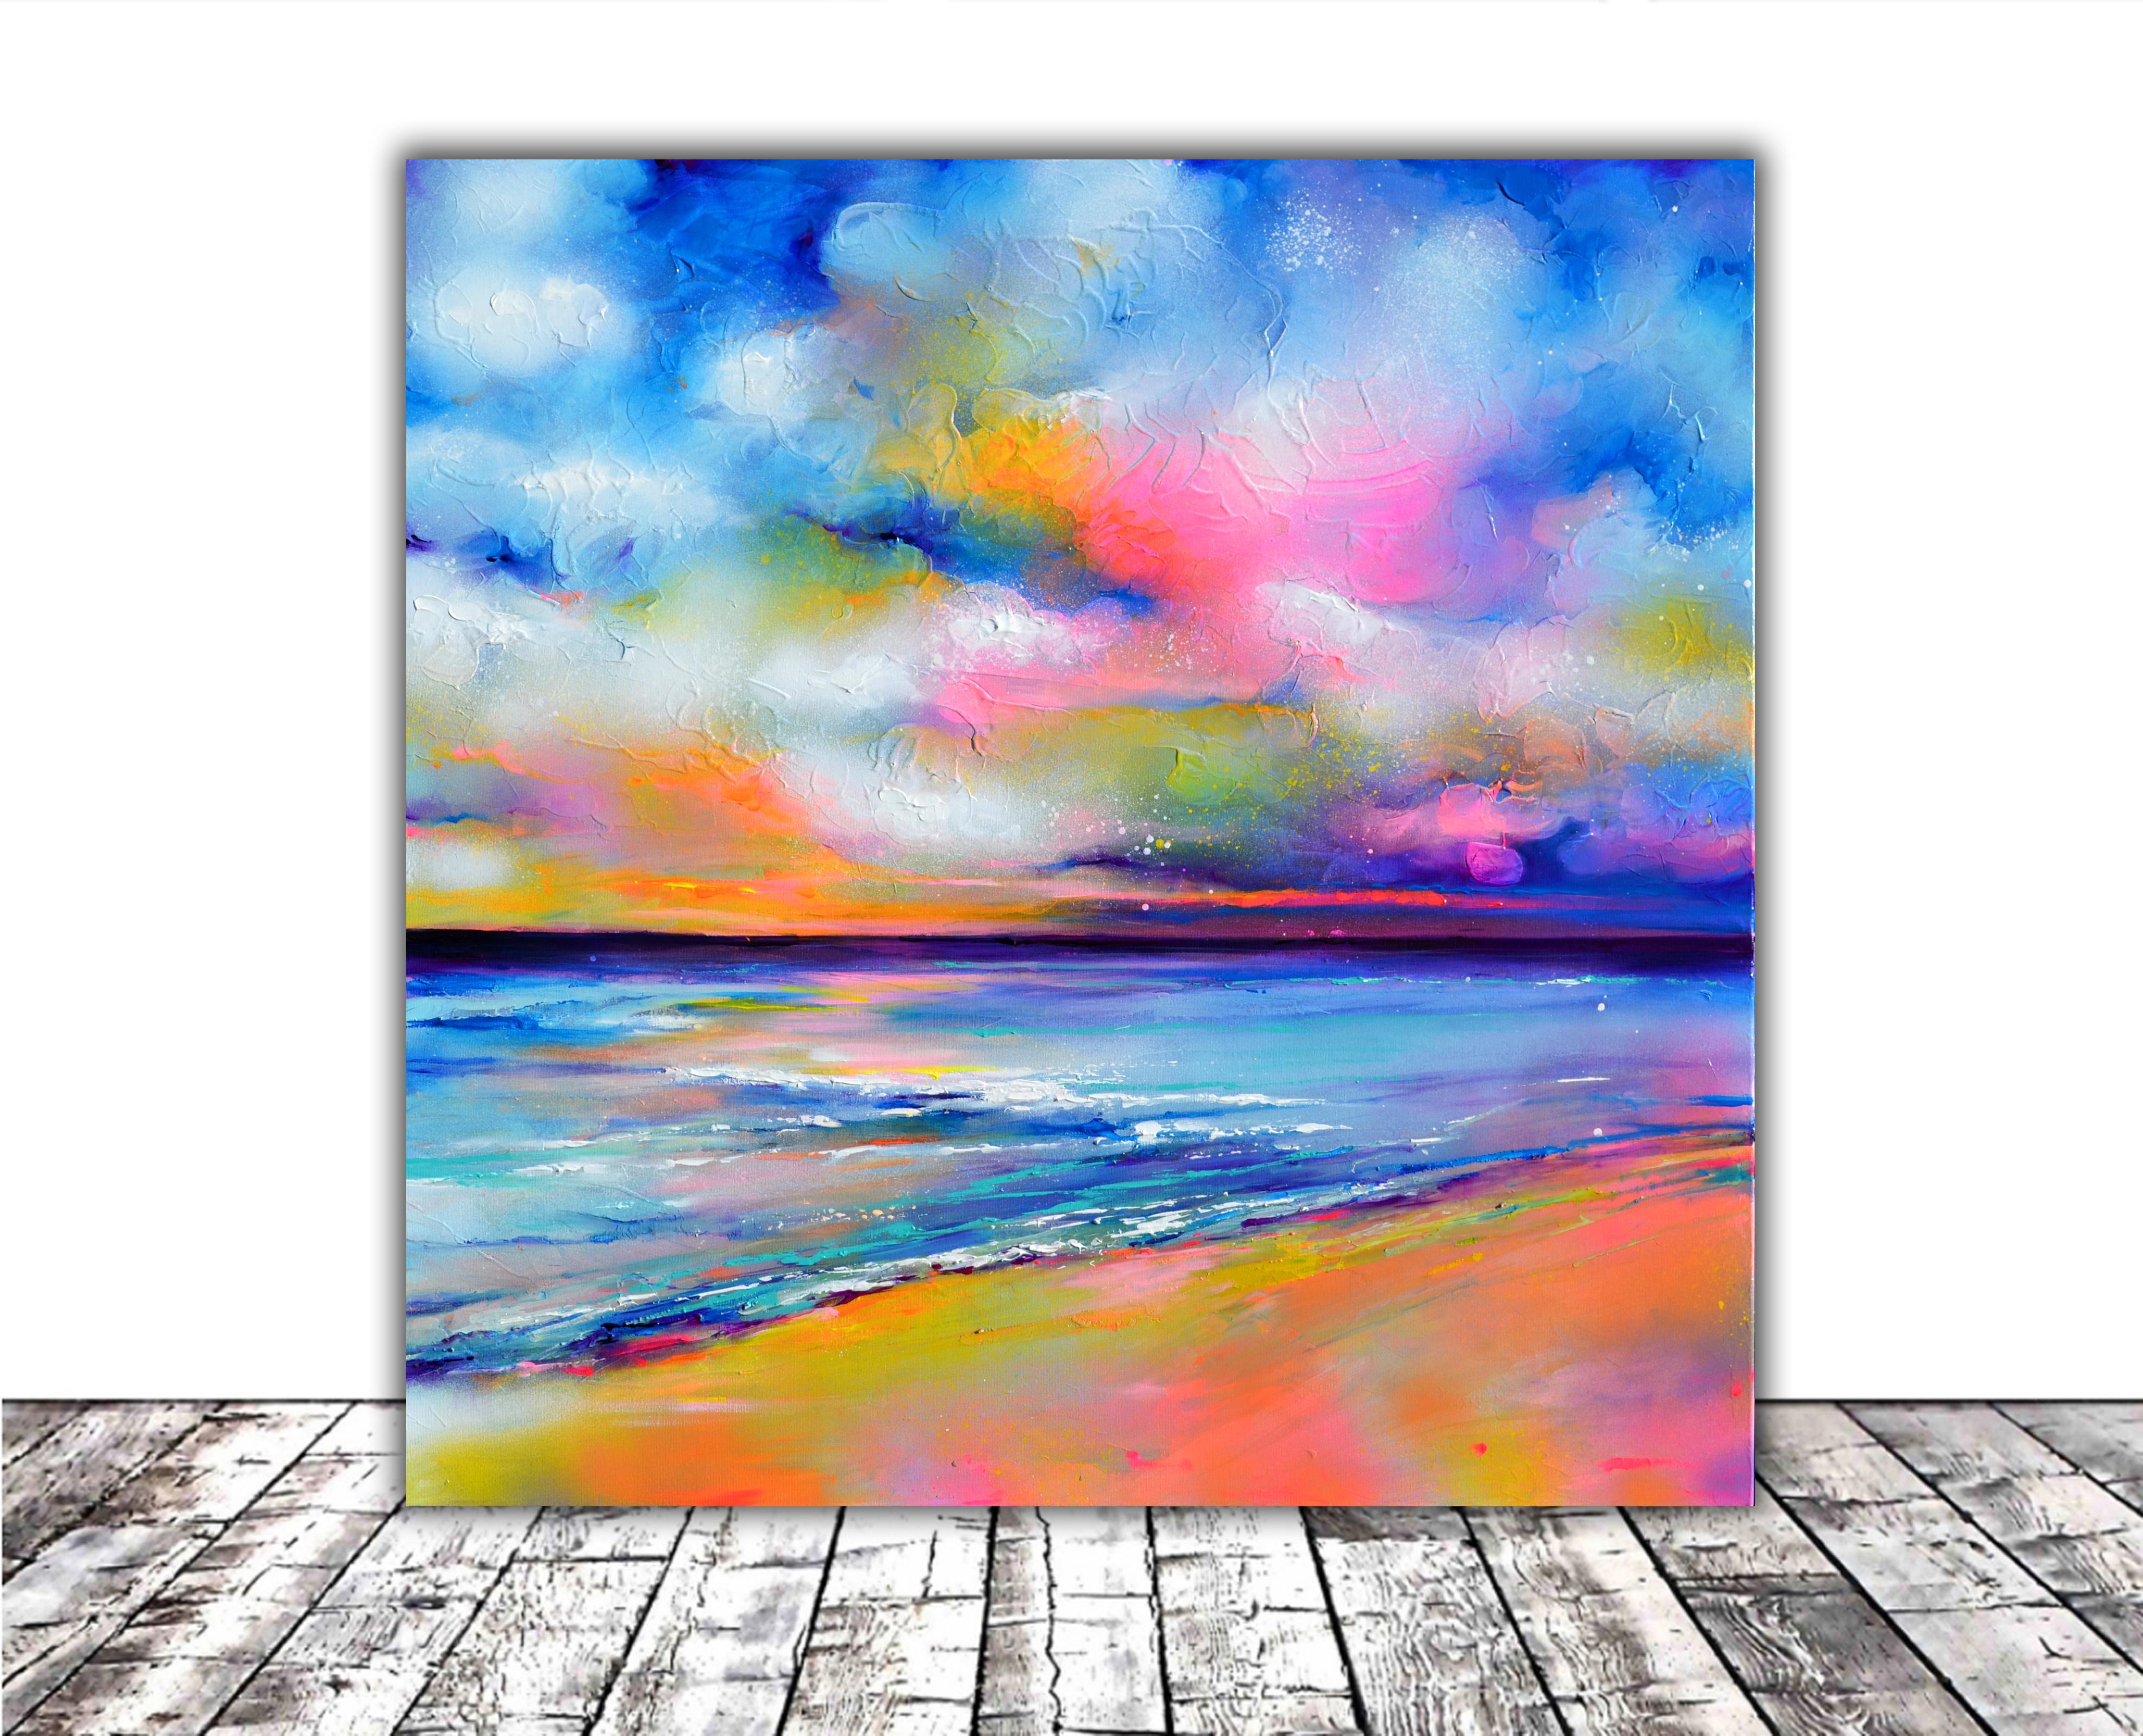 New Horizon 175 Colourful Sunset Seascape - Painting by Soos Roxana Gabriela